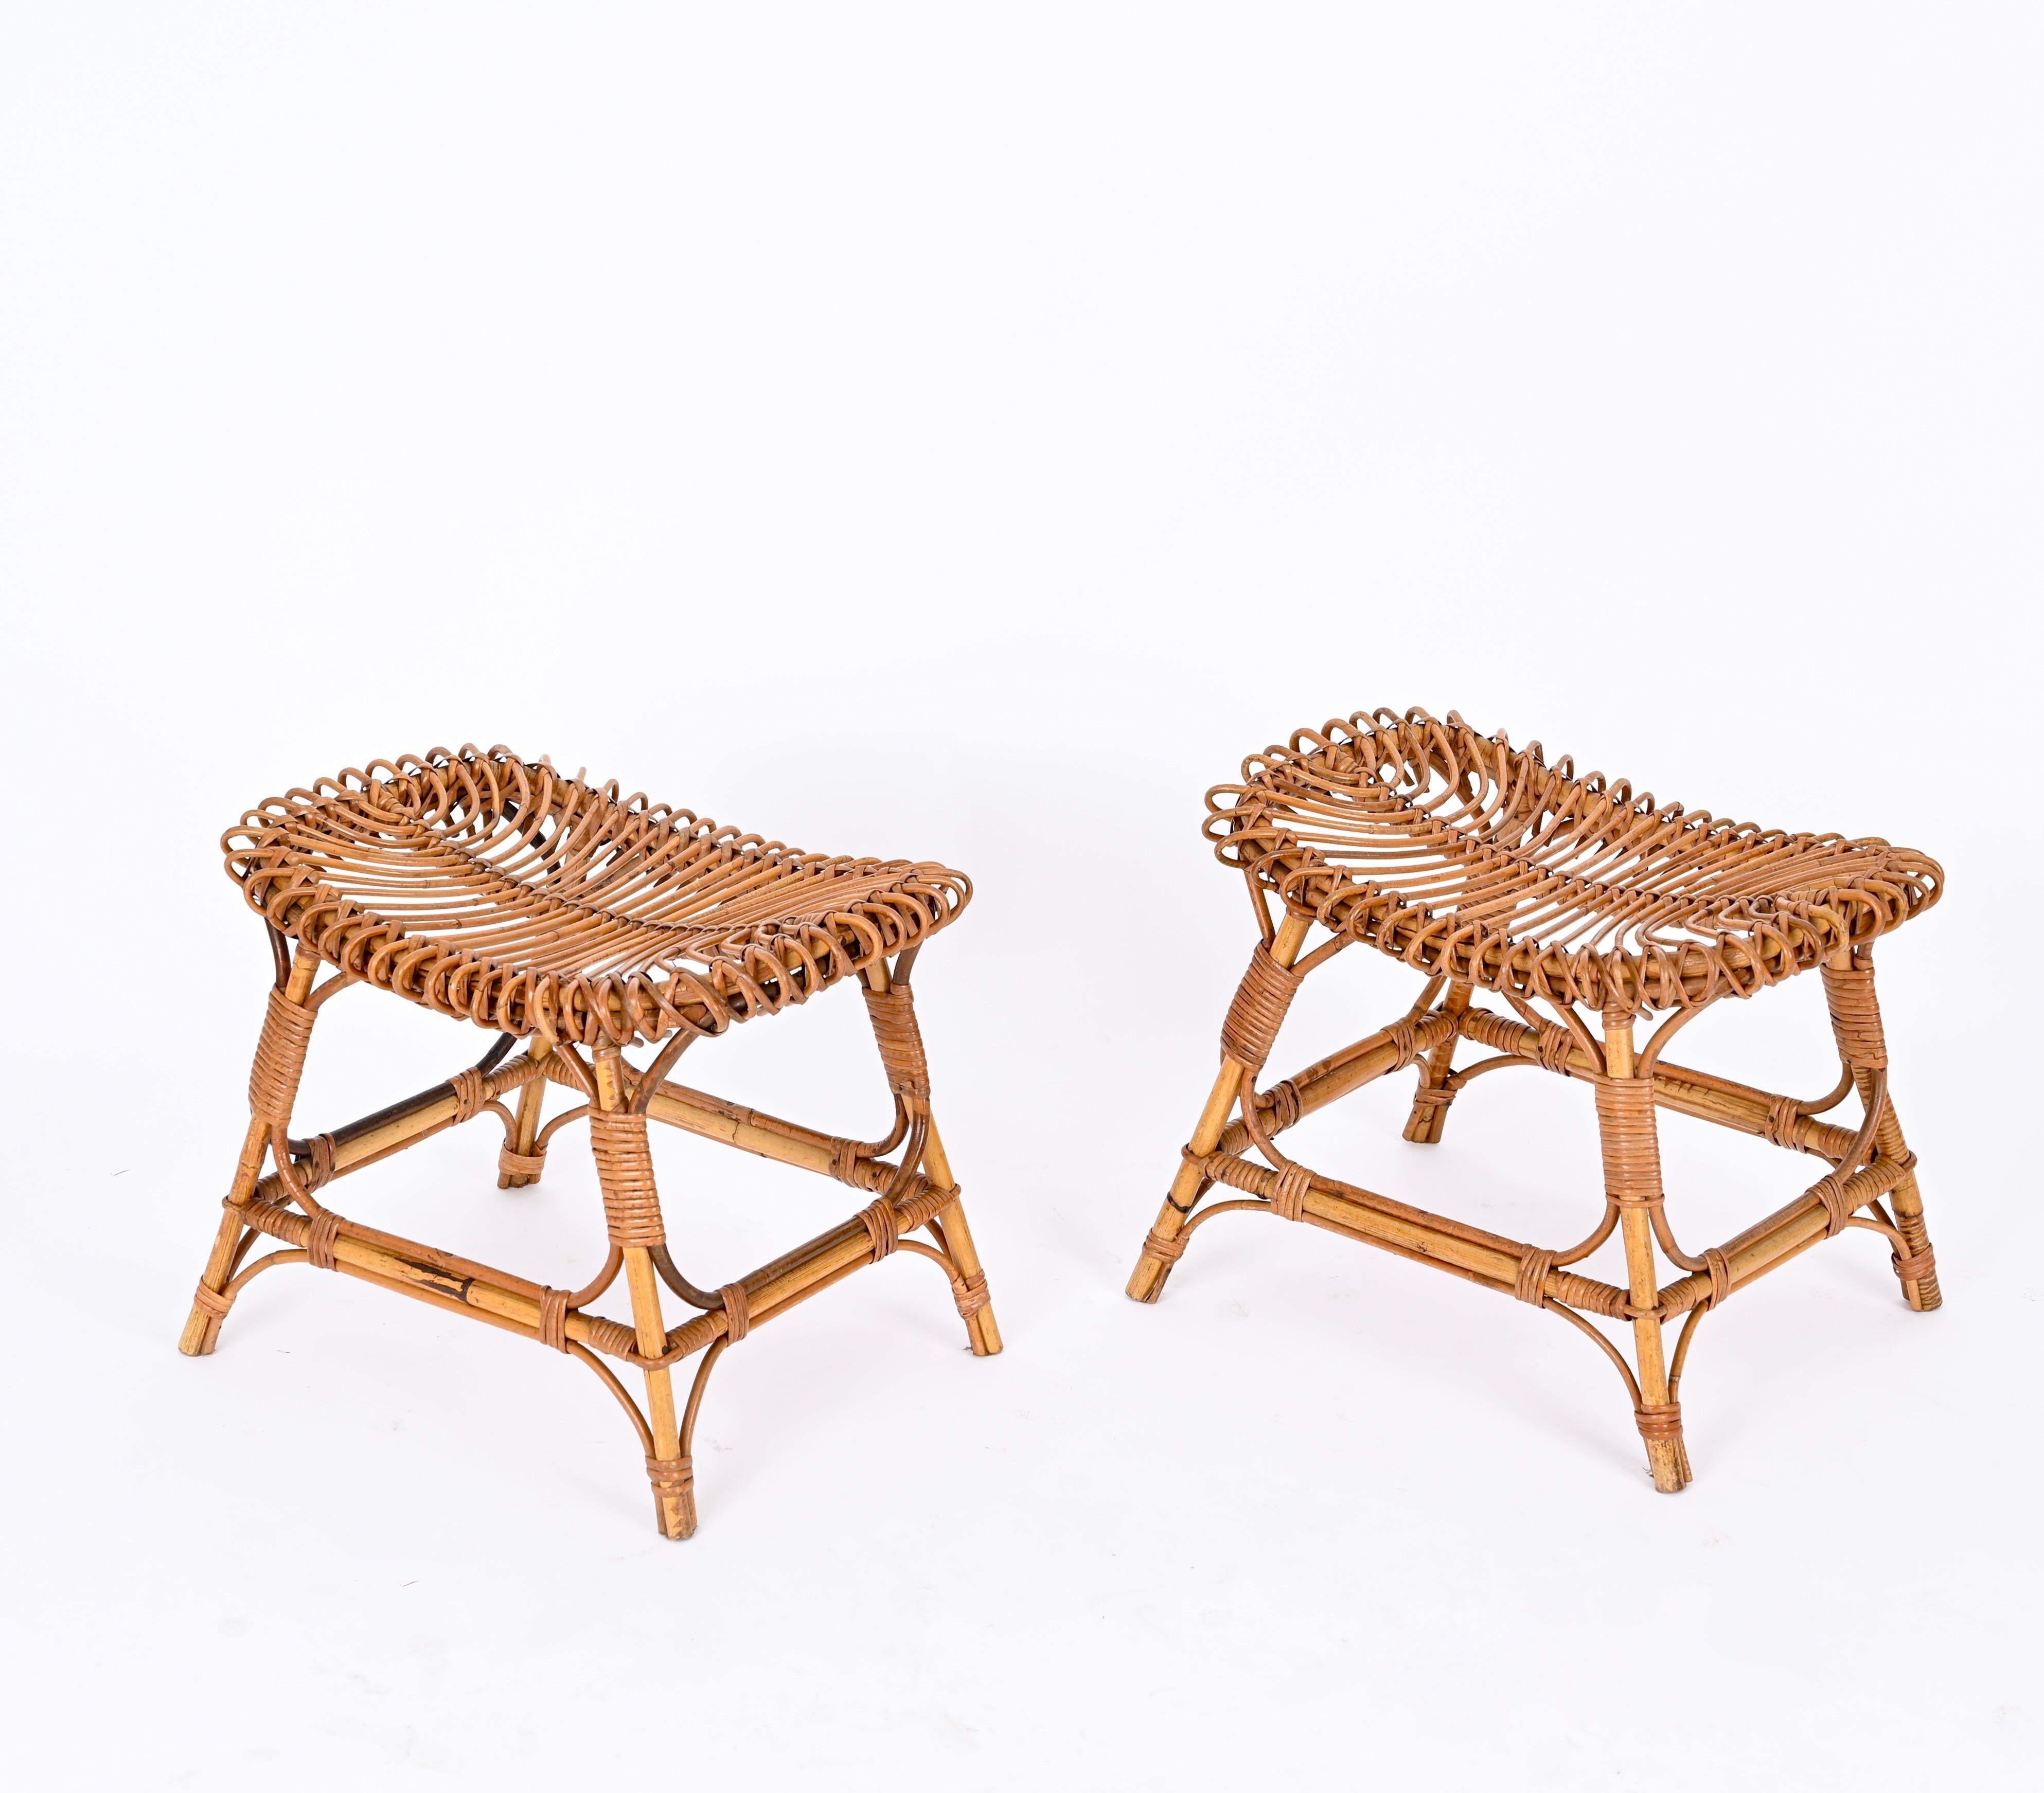 Hand-Crafted Franco Albini Mid-Century Rattan, Bamboo and Wicker, Pouf, Ottoman, Italy 1960s For Sale